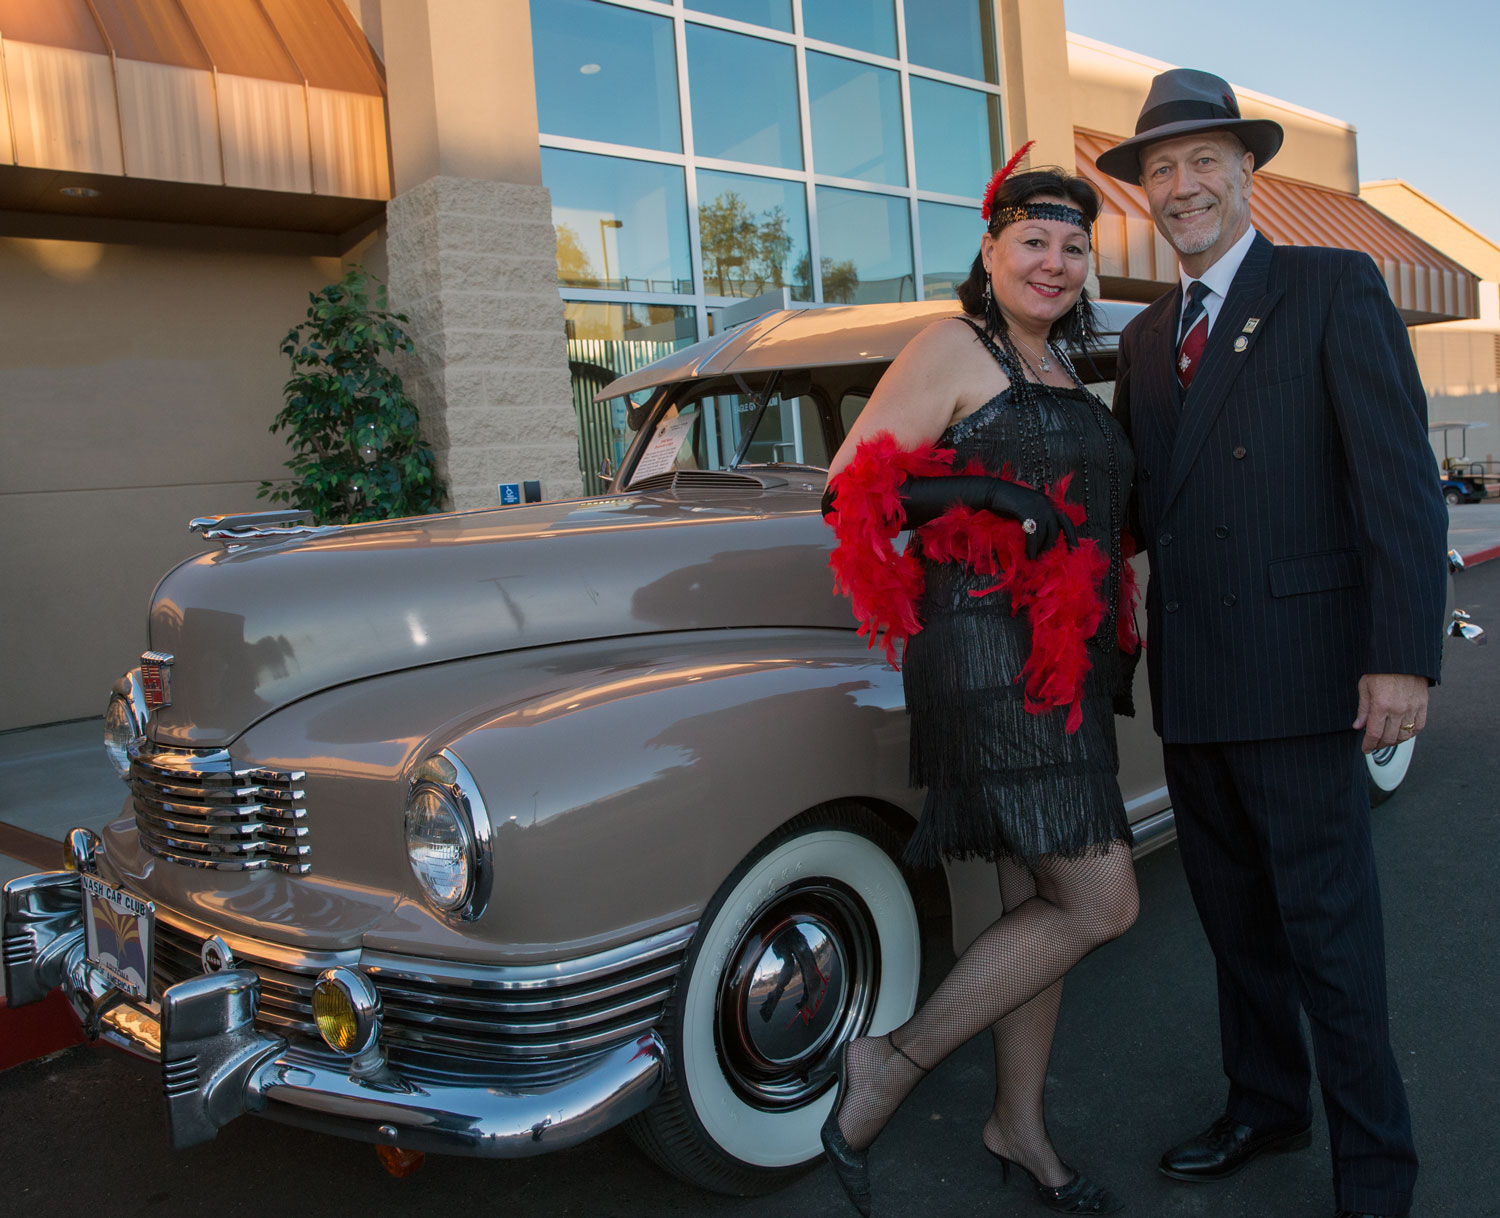 Sarah Nilsson, assistant professor of law, and her husband, Bob Wilson, at the 1920s-themed 90th Anniversary Celebration. (David Massey photo)